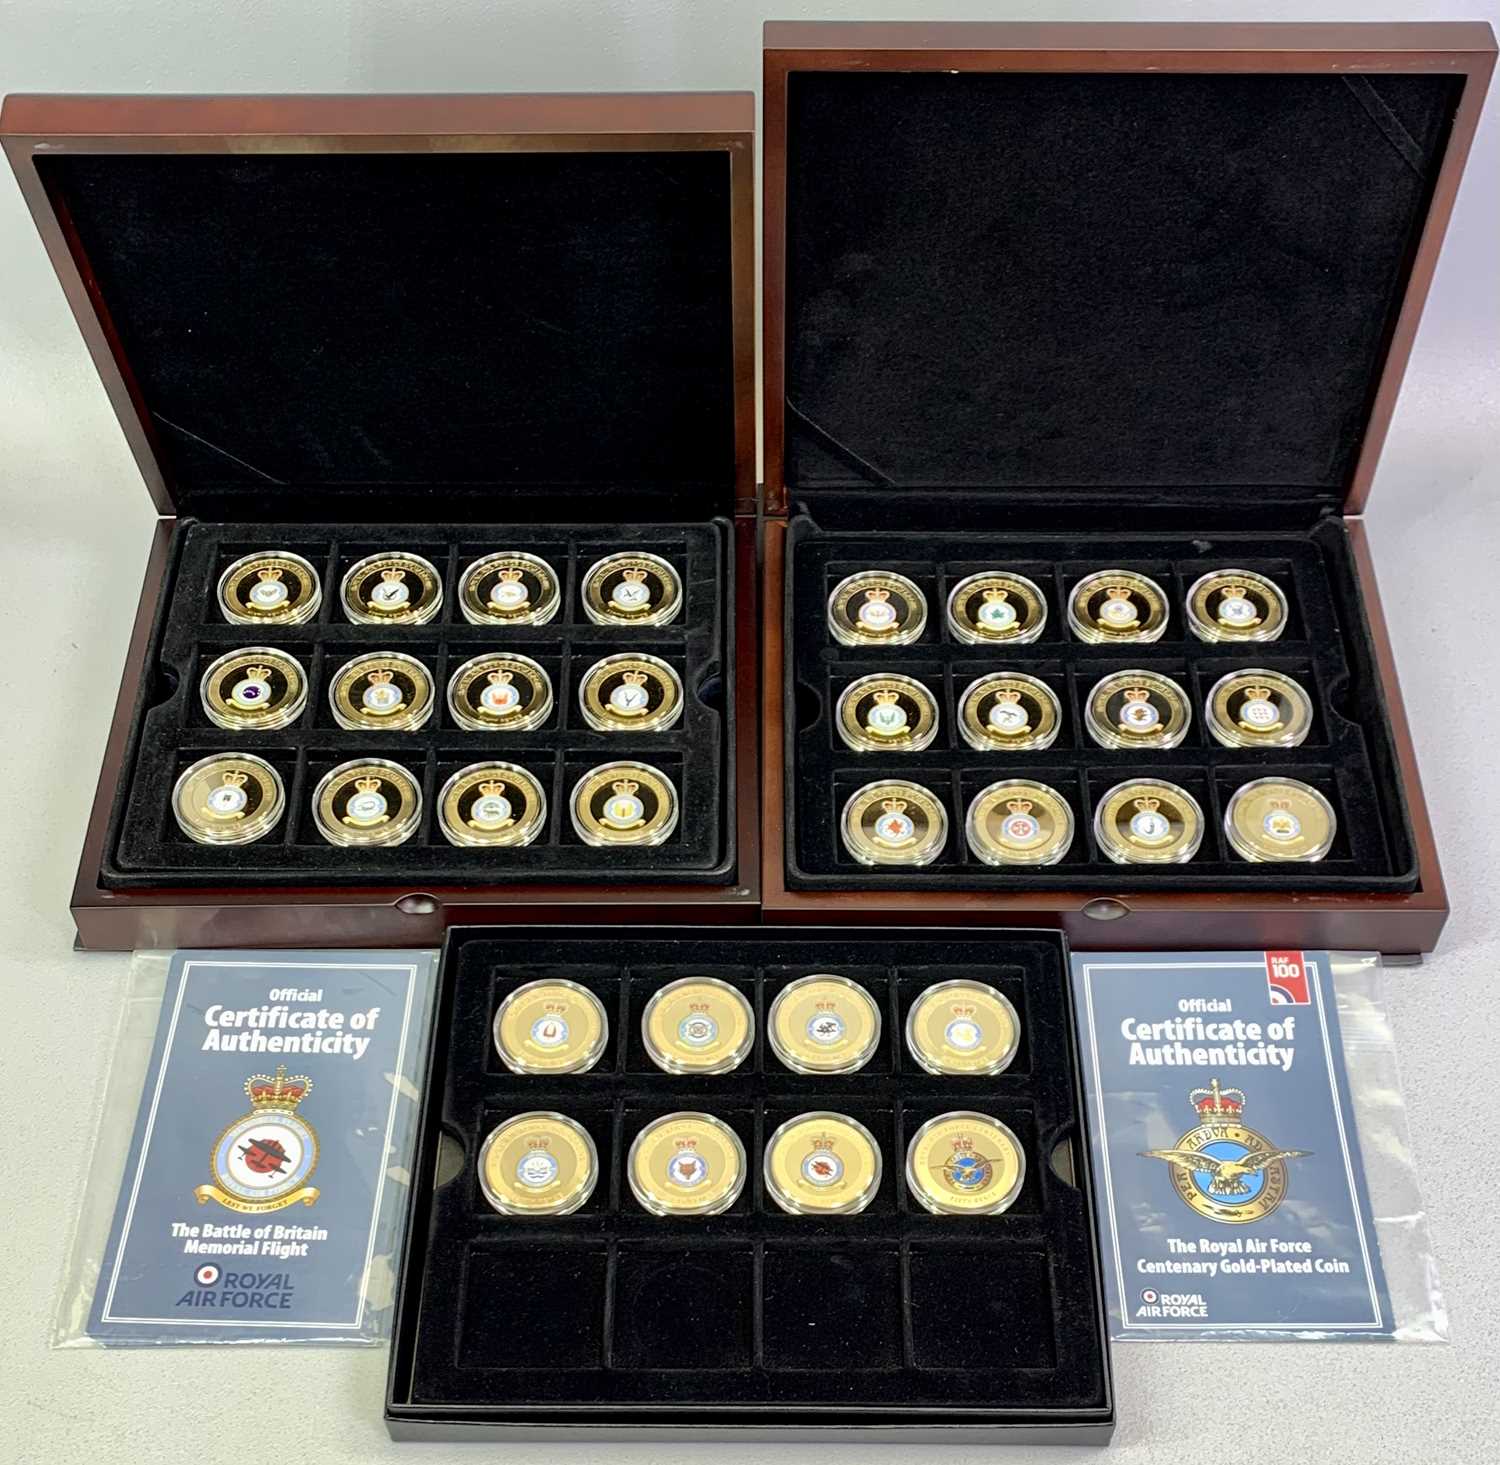 WESTMINSTER SQUADRONS OF THE ROYAL AIR FORCE COIN COLLECTION - 32 x 50p 24ct gold plated coins in